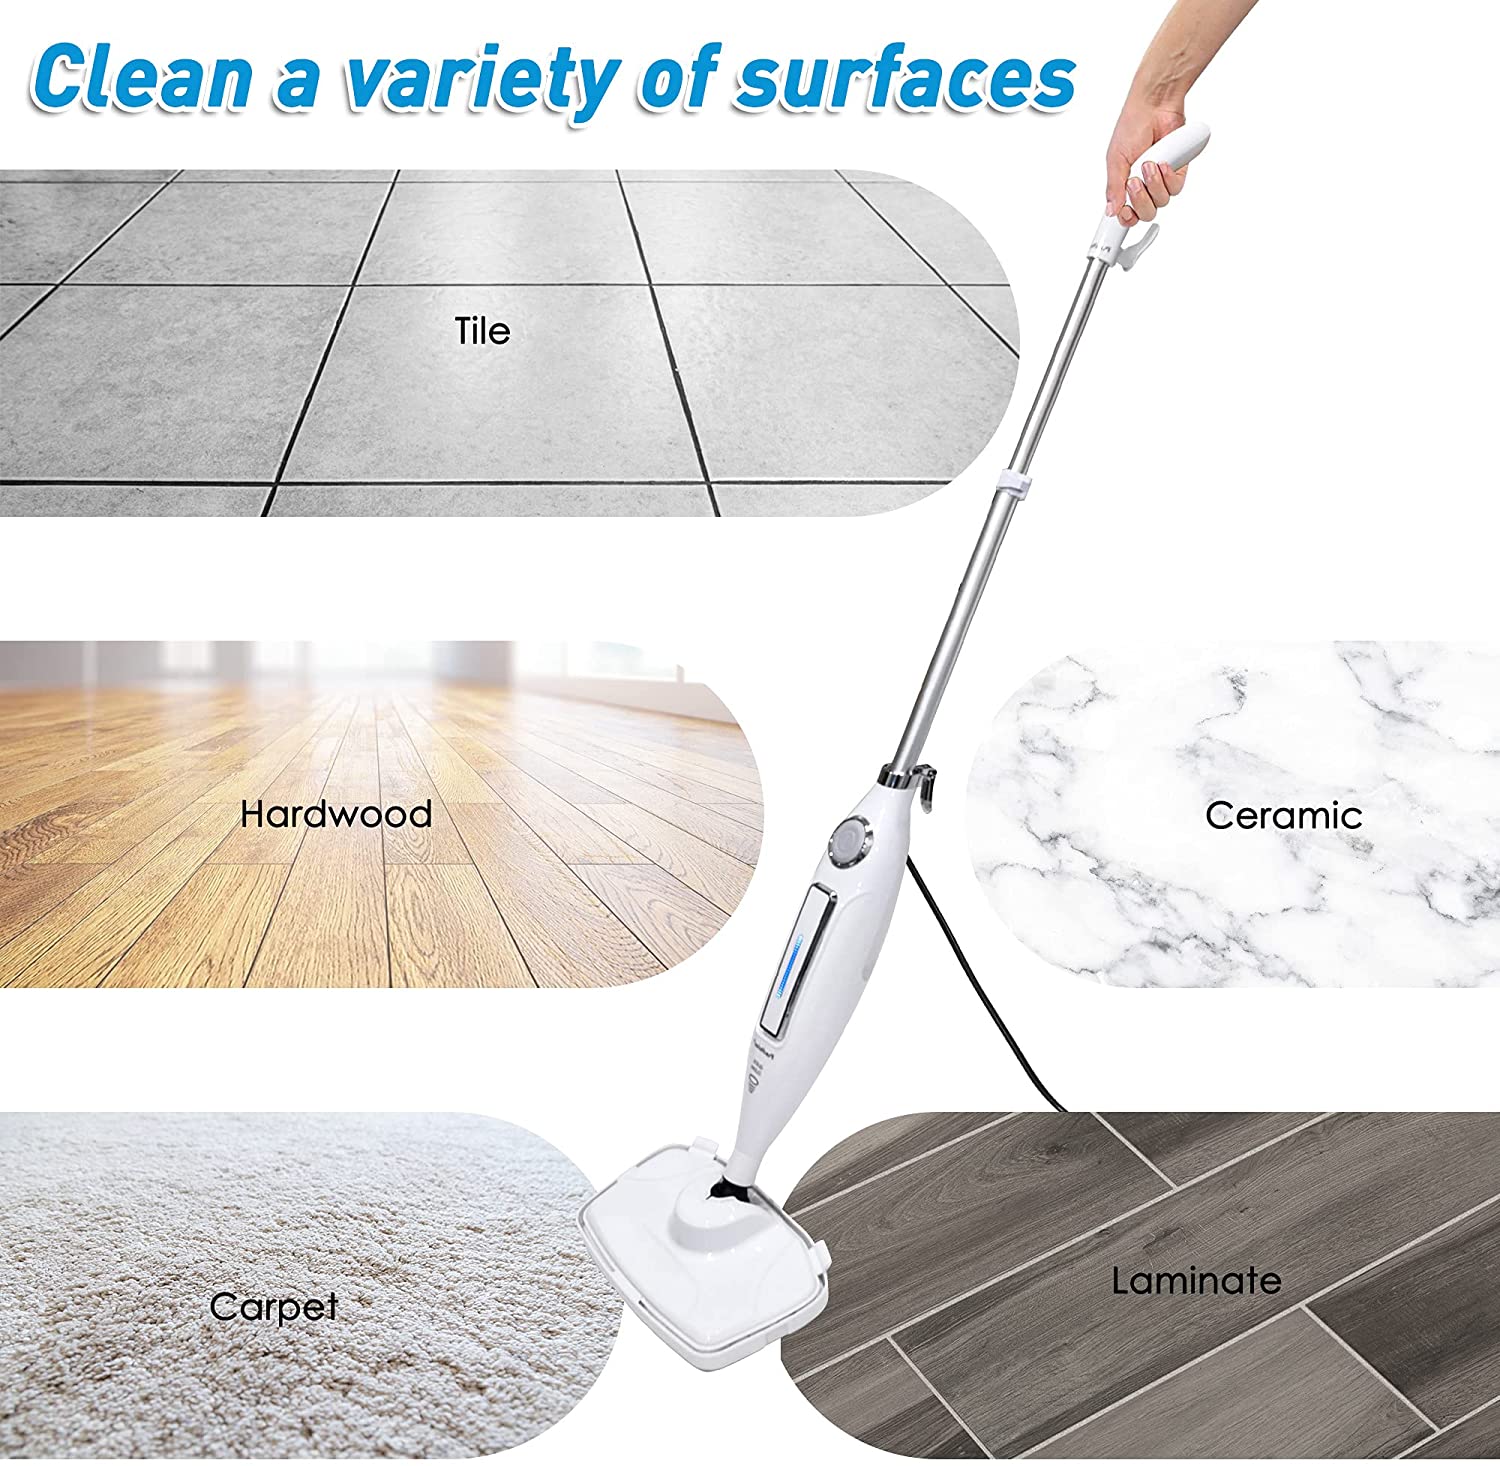 (Out of Stock) Steam Mop for All Floors, Steam Mops with 2 Pads, Cleaning Cleaner Head 180 Degree Turn